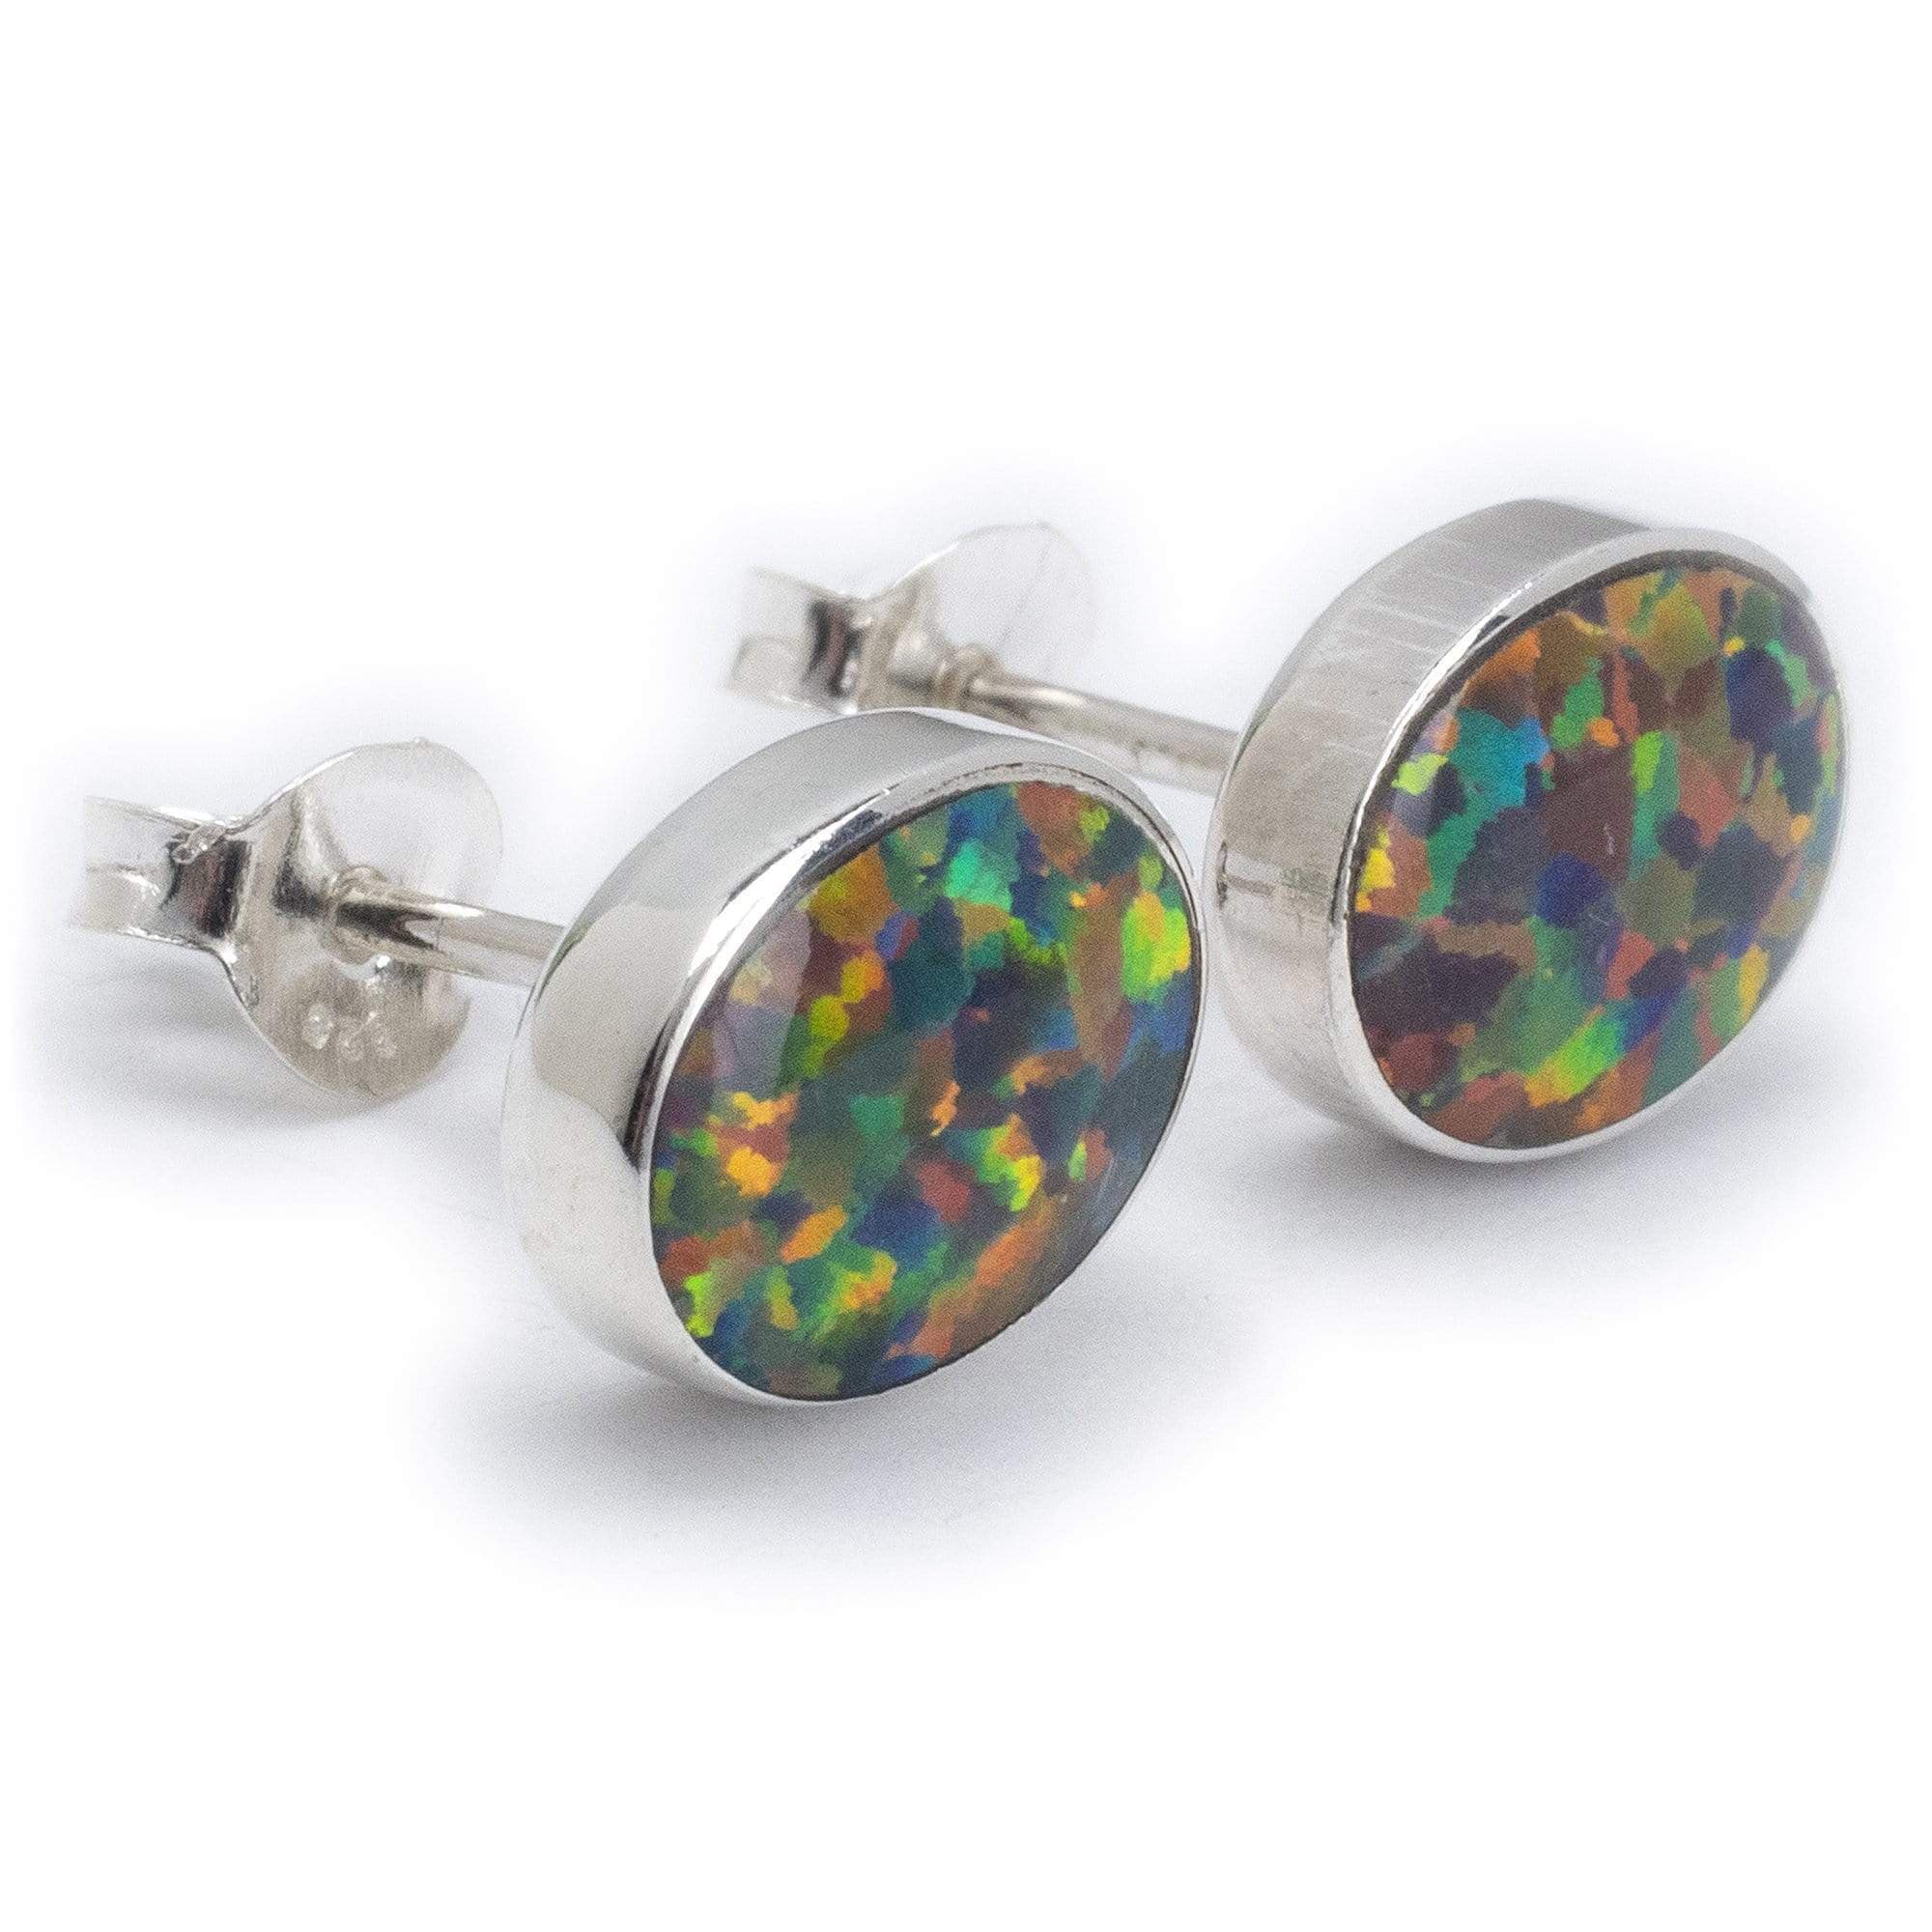 Kalifano Southwest Silver Jewelry Rainbow Opal Oval 925 Sterling Silver Earring with Stud Backing Handmade NME.0023.RO